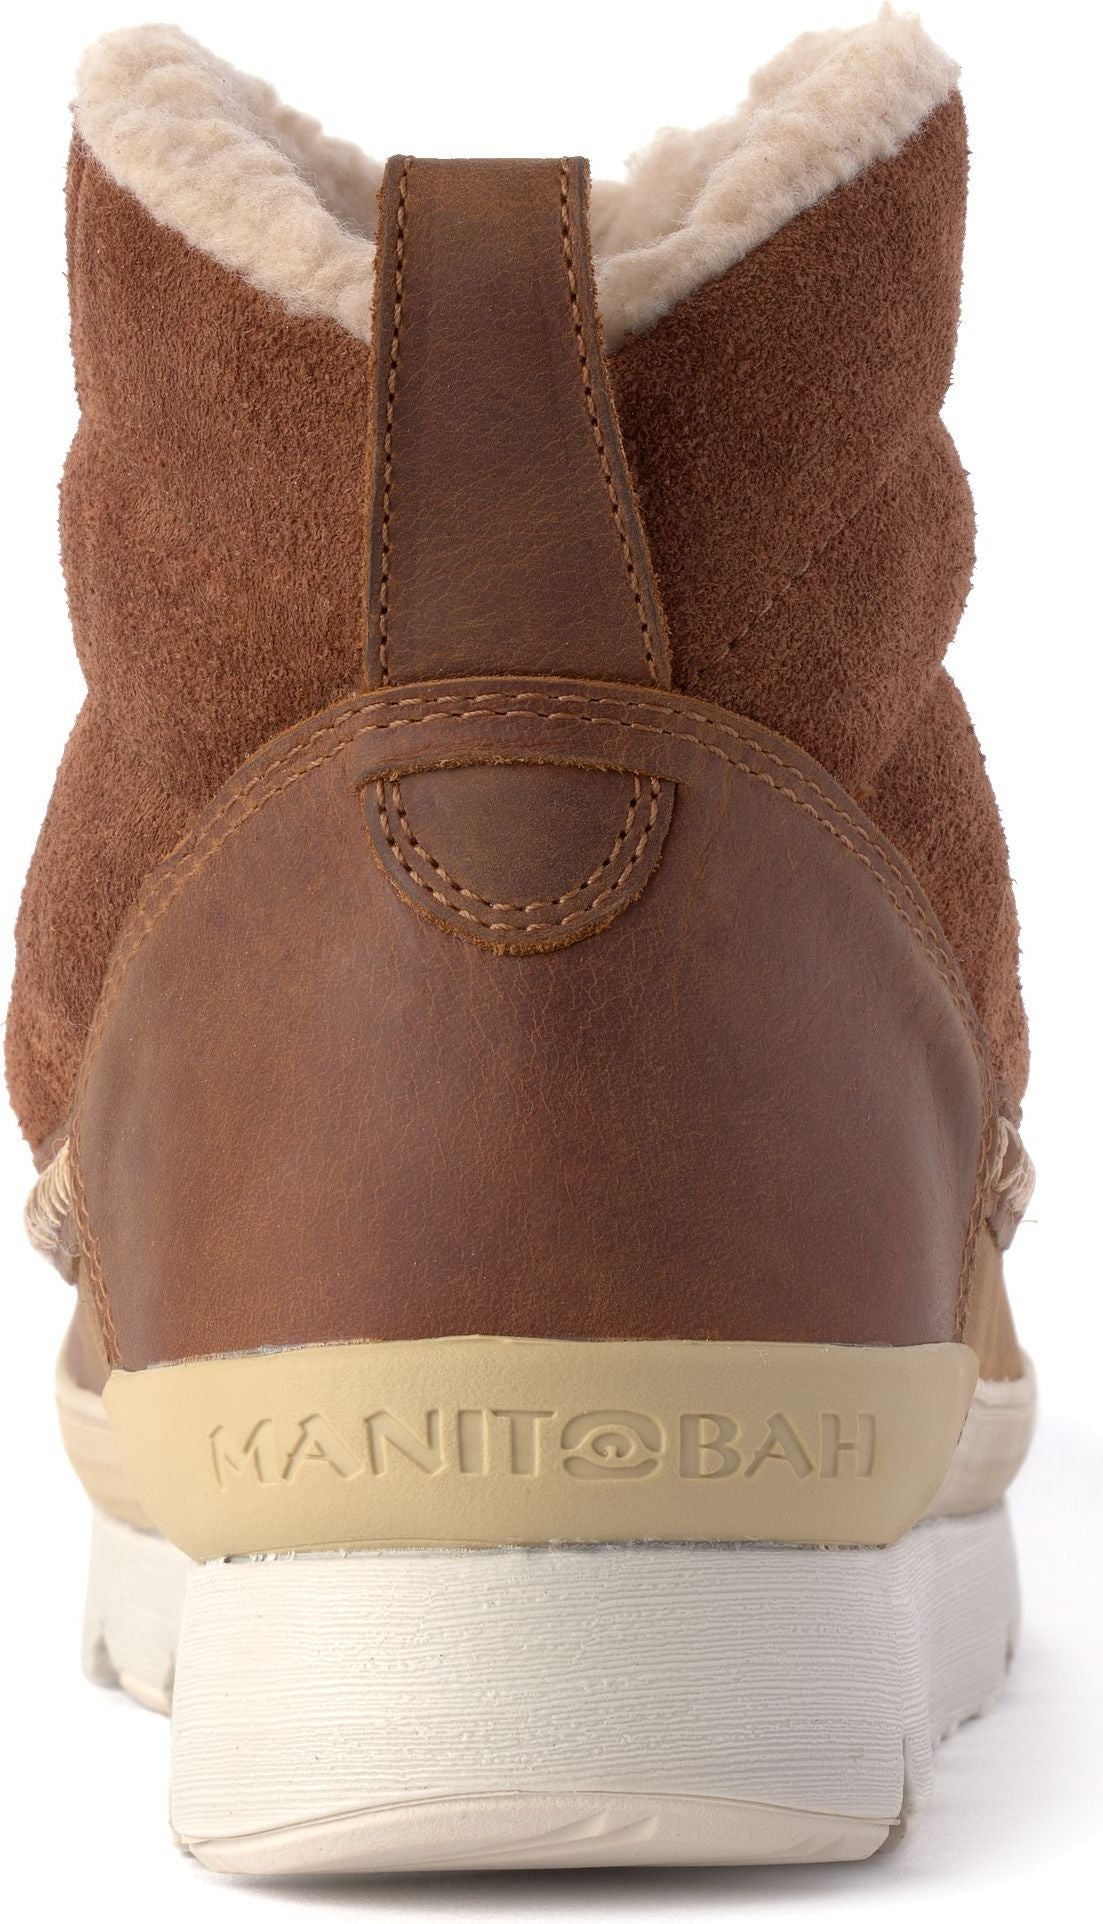 Manitobah Mukluks Boots Pacific Insulated Oak